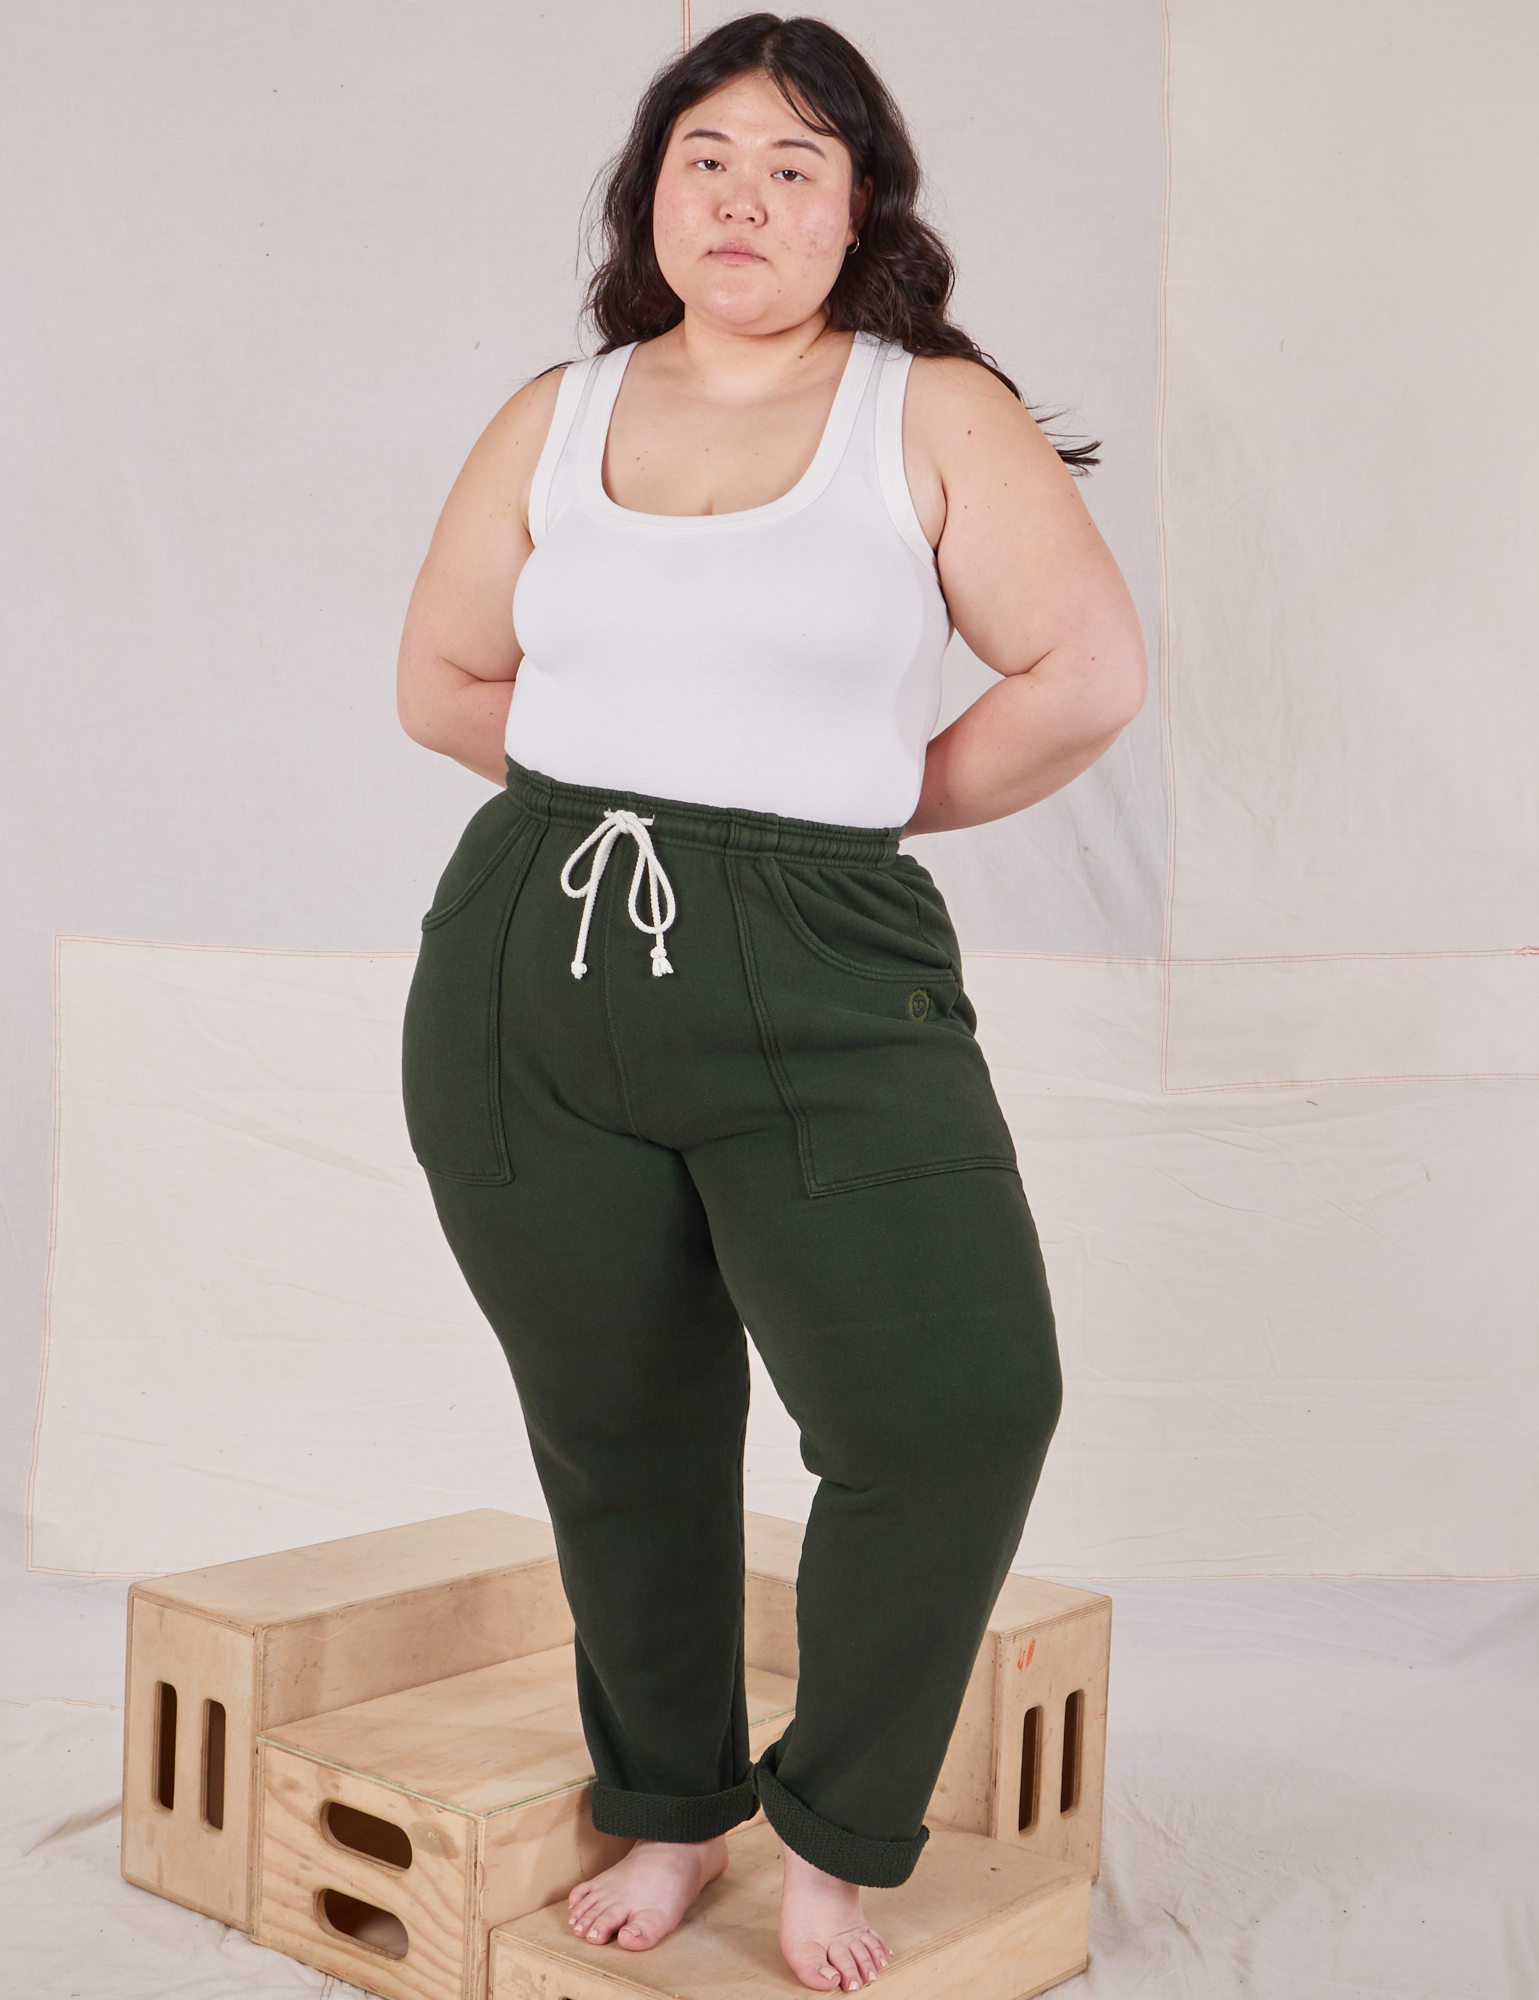 Ashley is 5&#39;7&quot; and wearing L Rolled Cuff Sweat Pants in Swamp Green and vintage off-white Cropped Tank